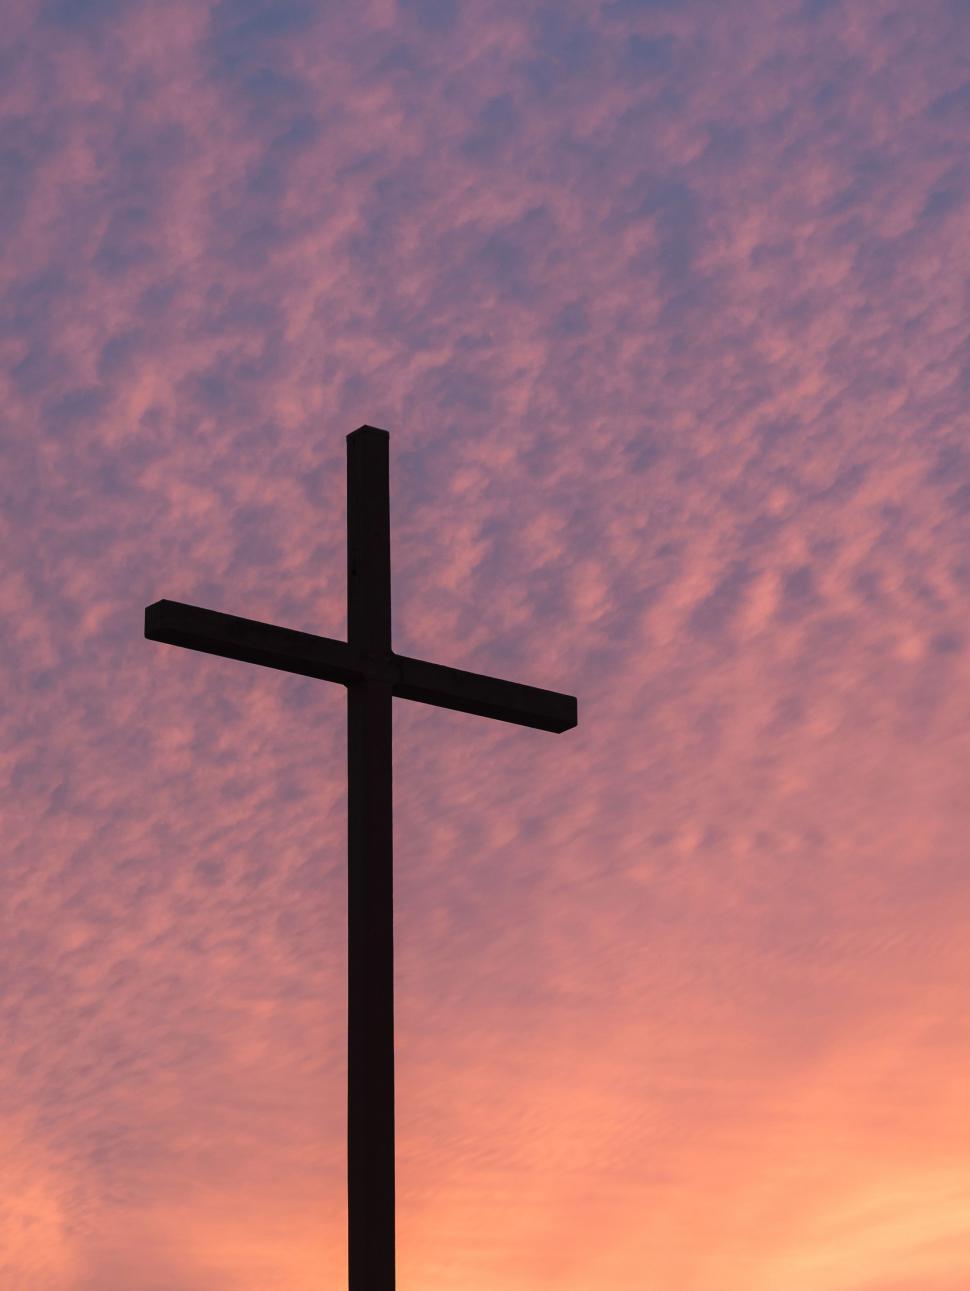 Free Image of Cross on Top of a Hill at Sunset 